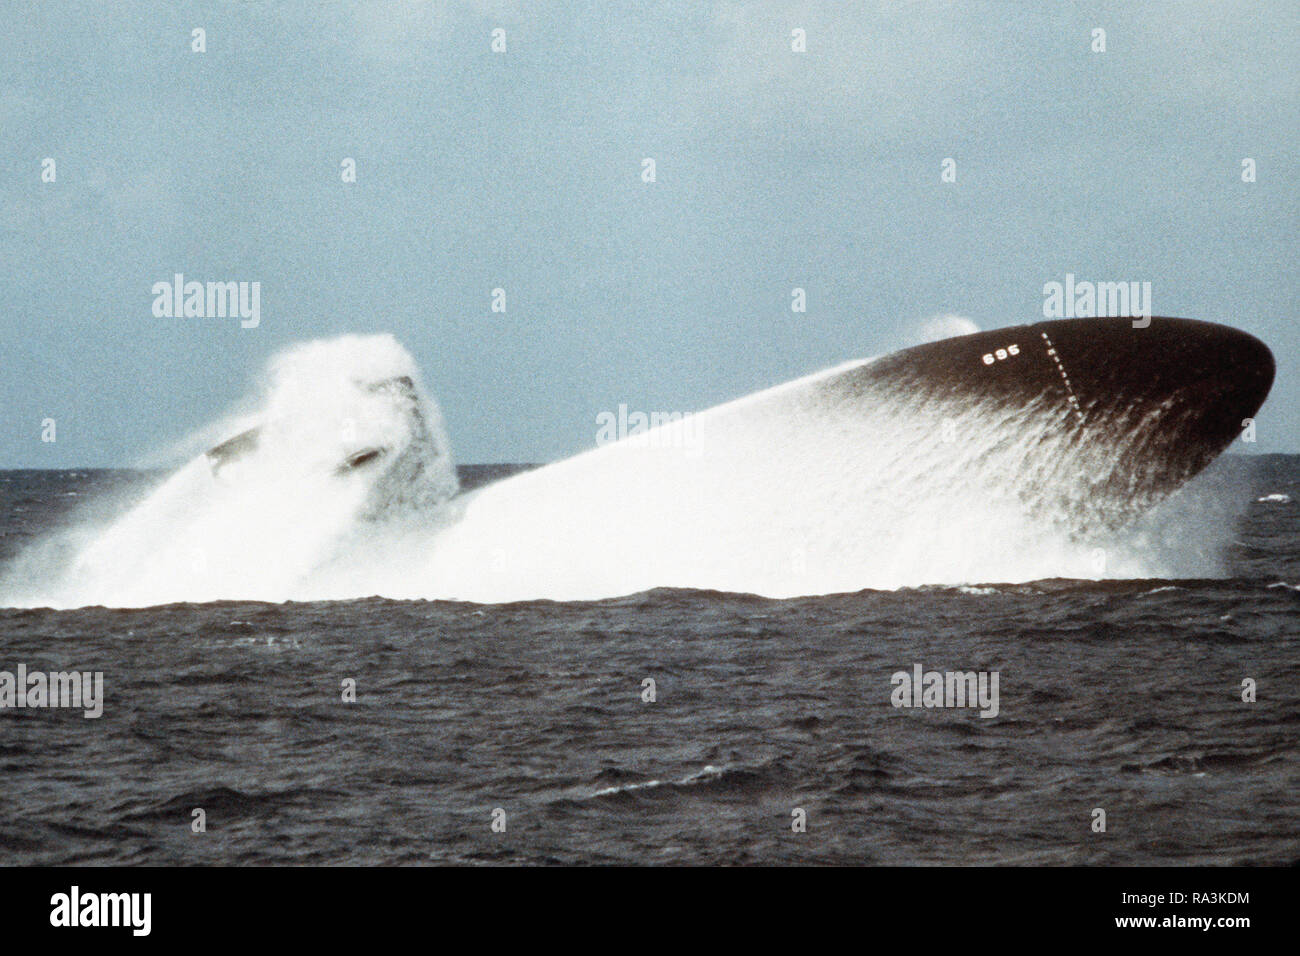 1978 - A starboard view of the nuclear-powered attack submarine BIRMINGHAM (SSN-695) conducting an emergency surfacing exercise during sea trials. Stock Photo